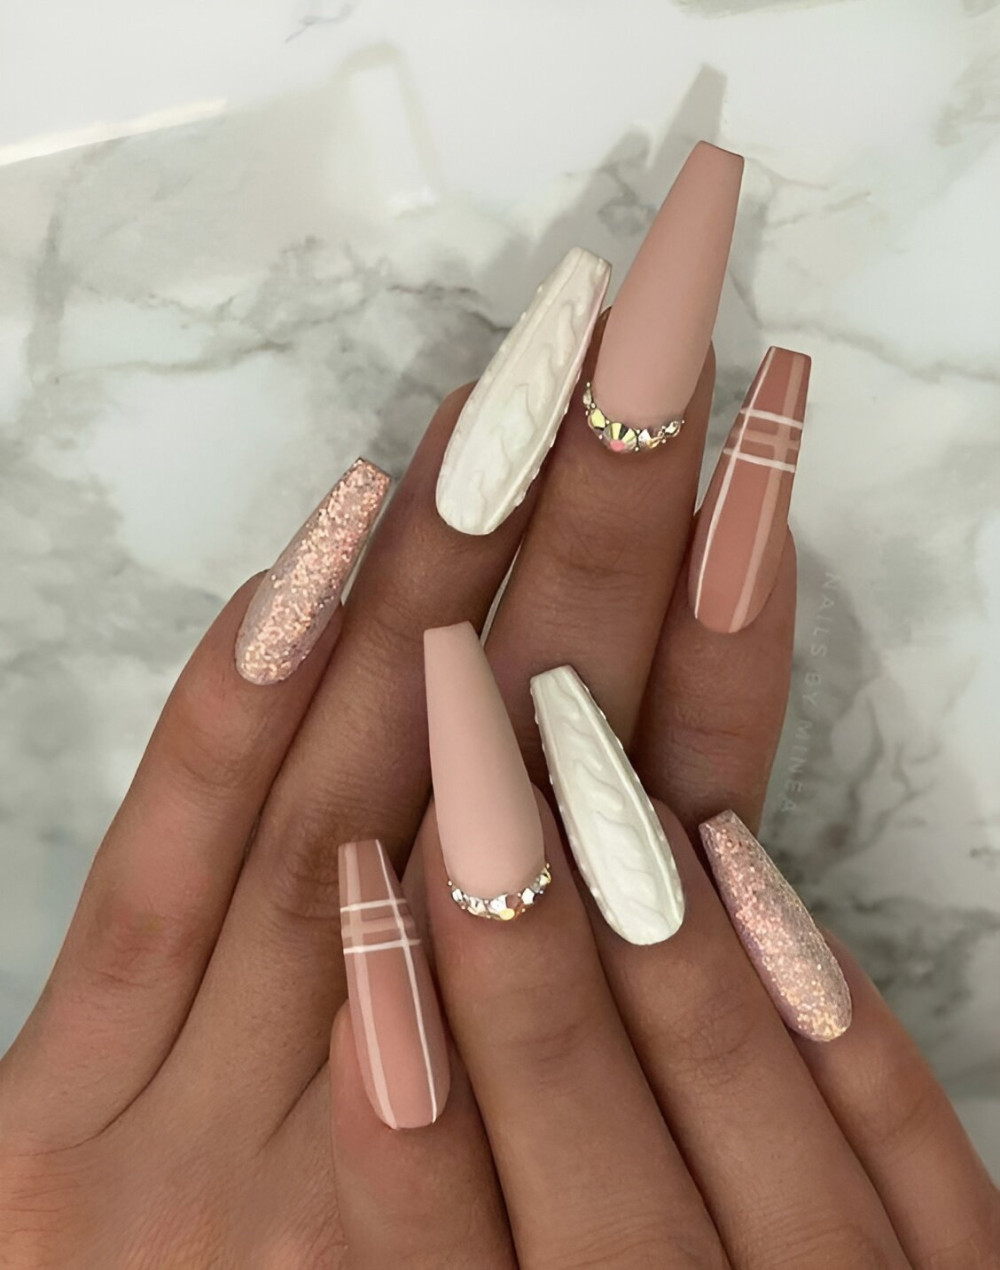 35 Breathtaking Nail Design Ideas For The Perfect Manicure - 247